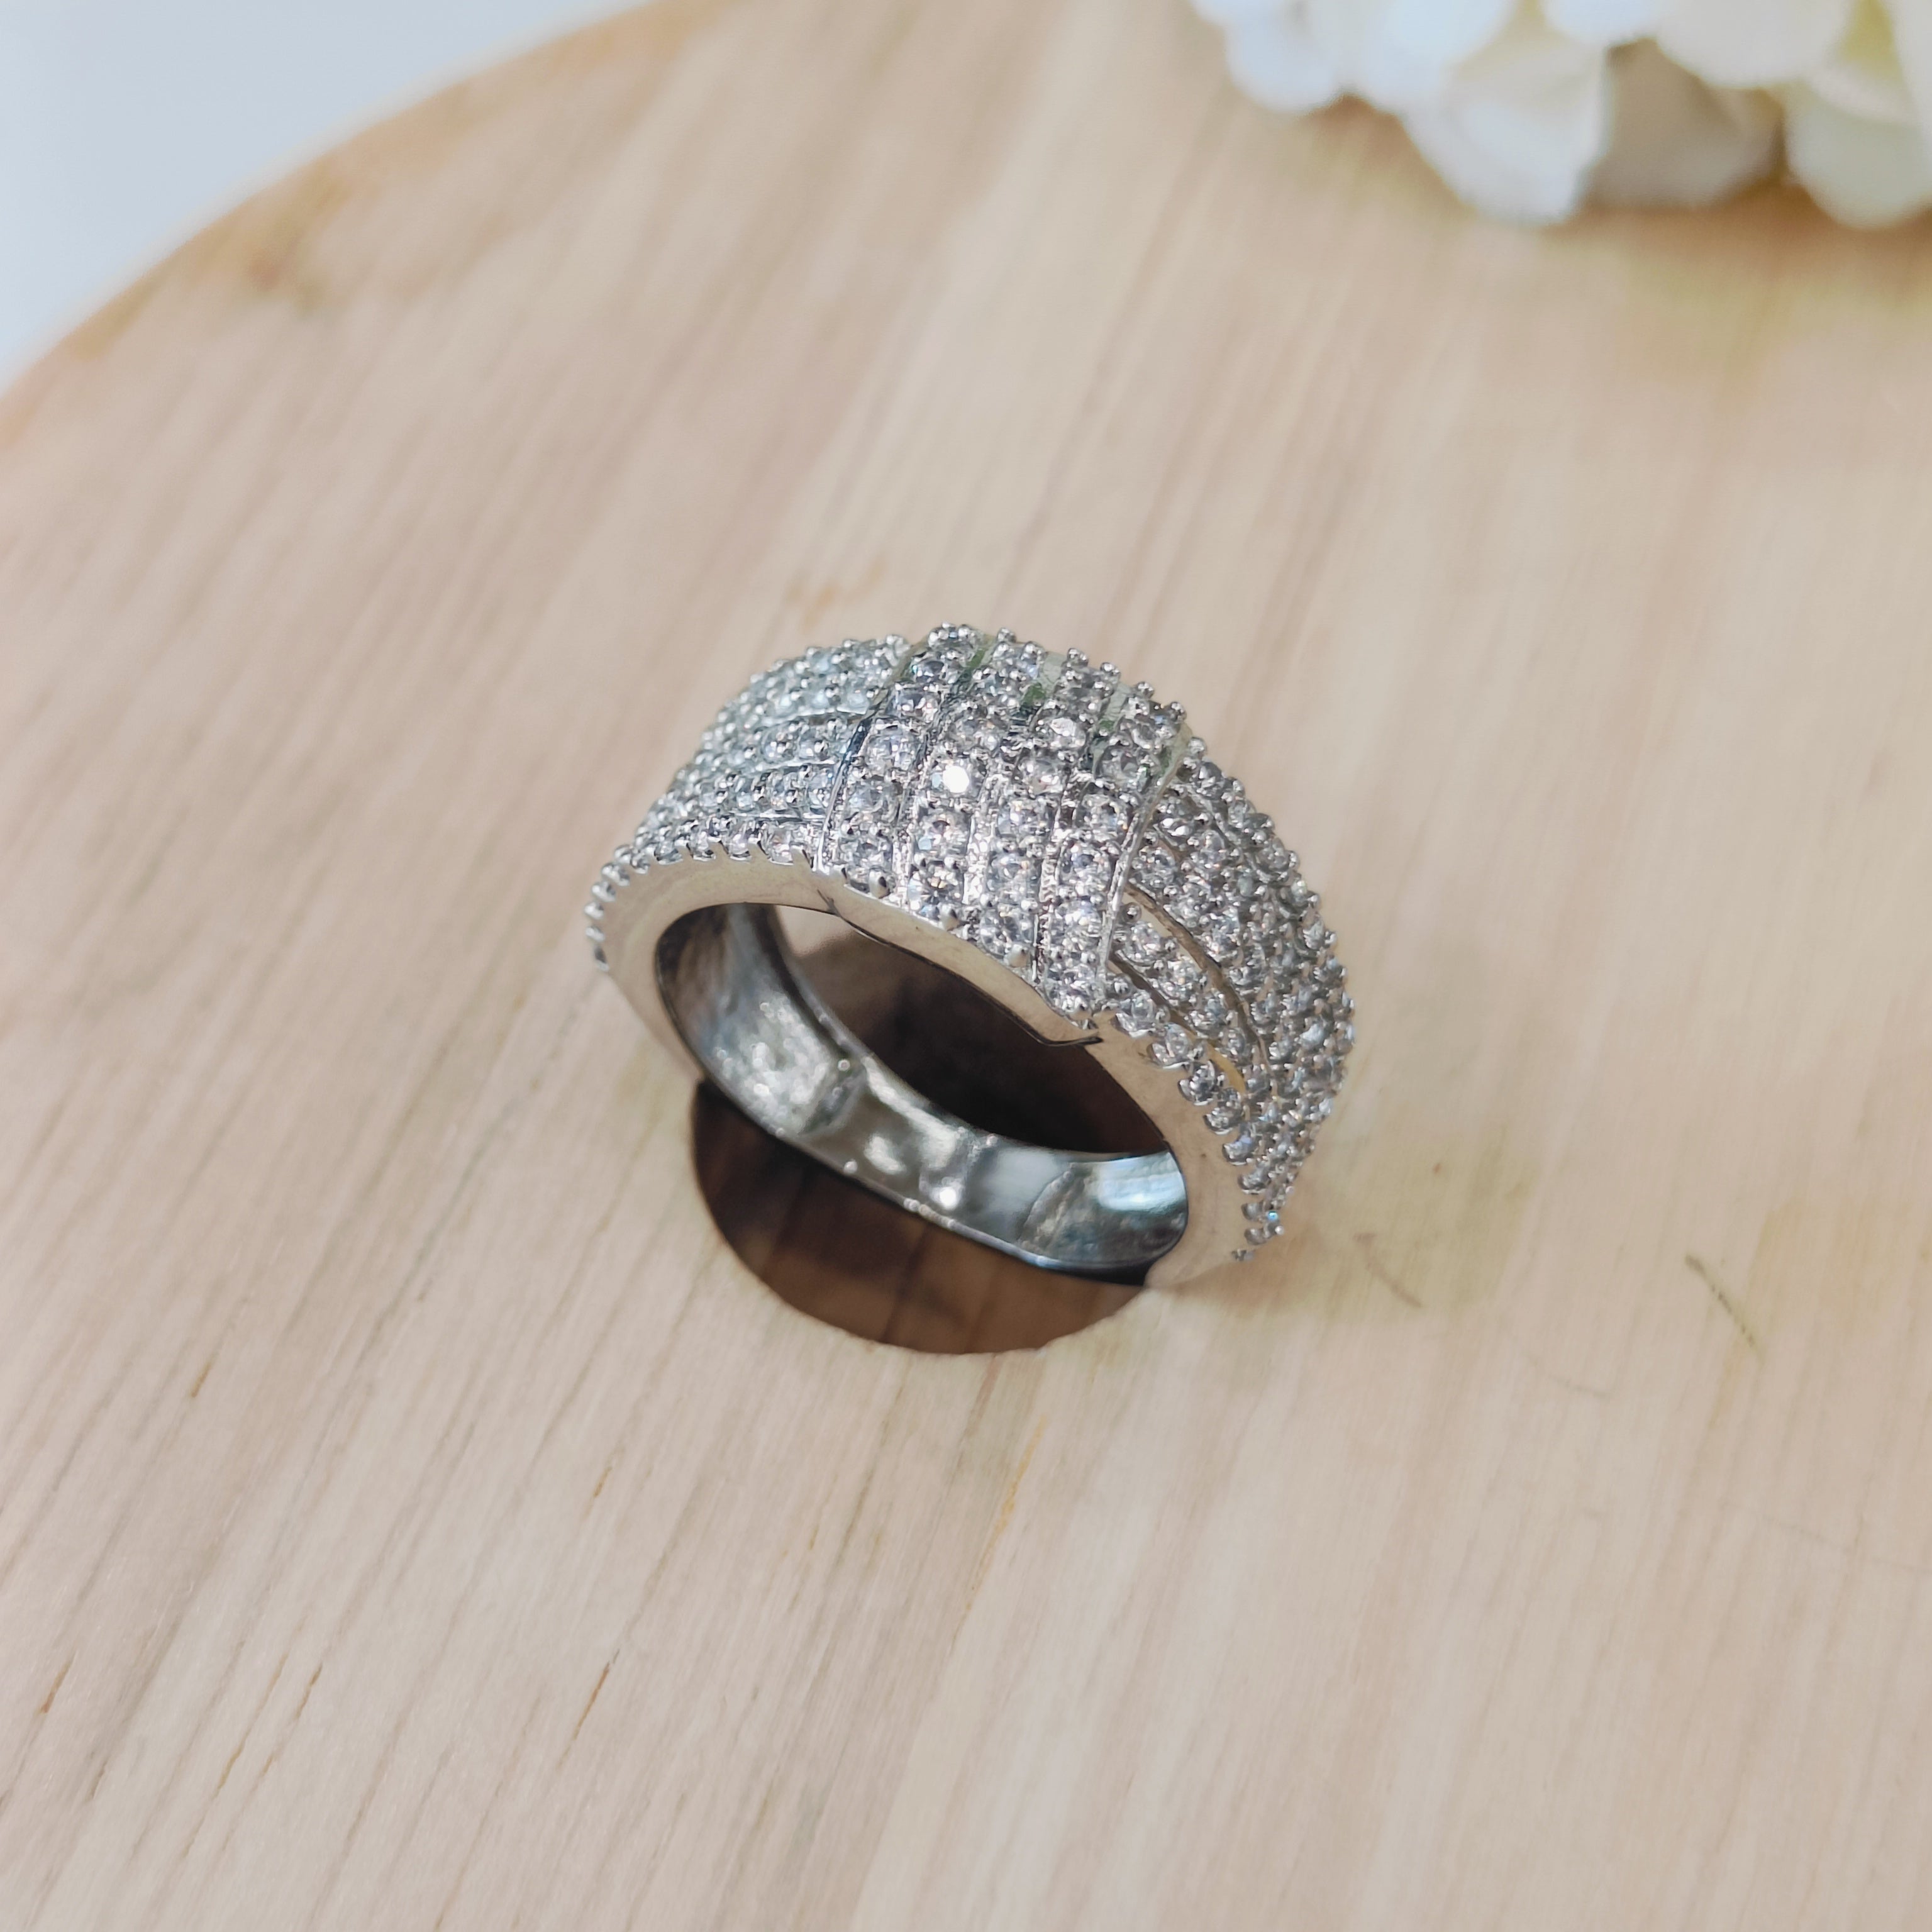 Vs sterling silver cocktail ring 167